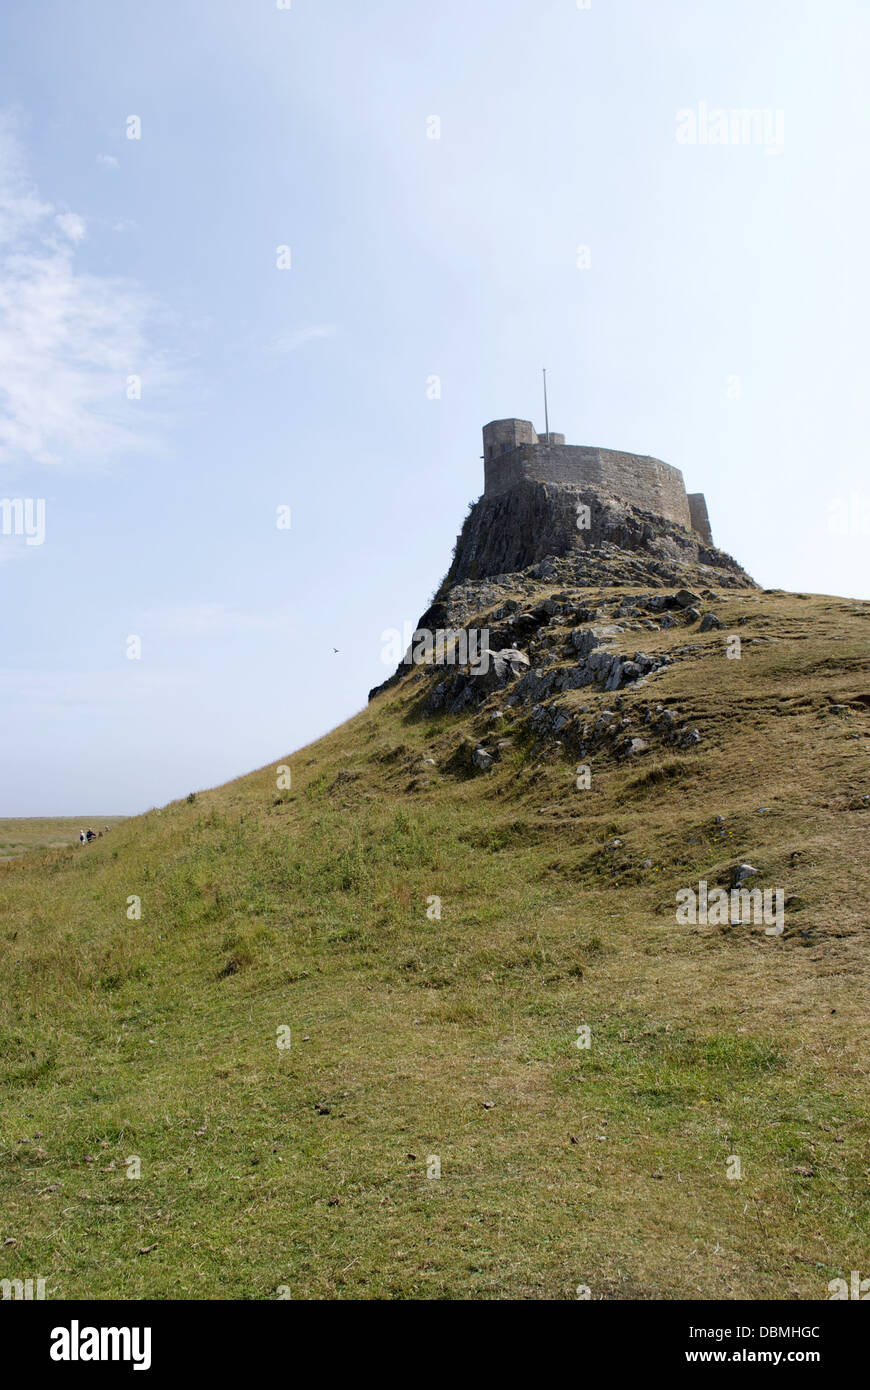 Looking up at the castle on holy island Stock Photo